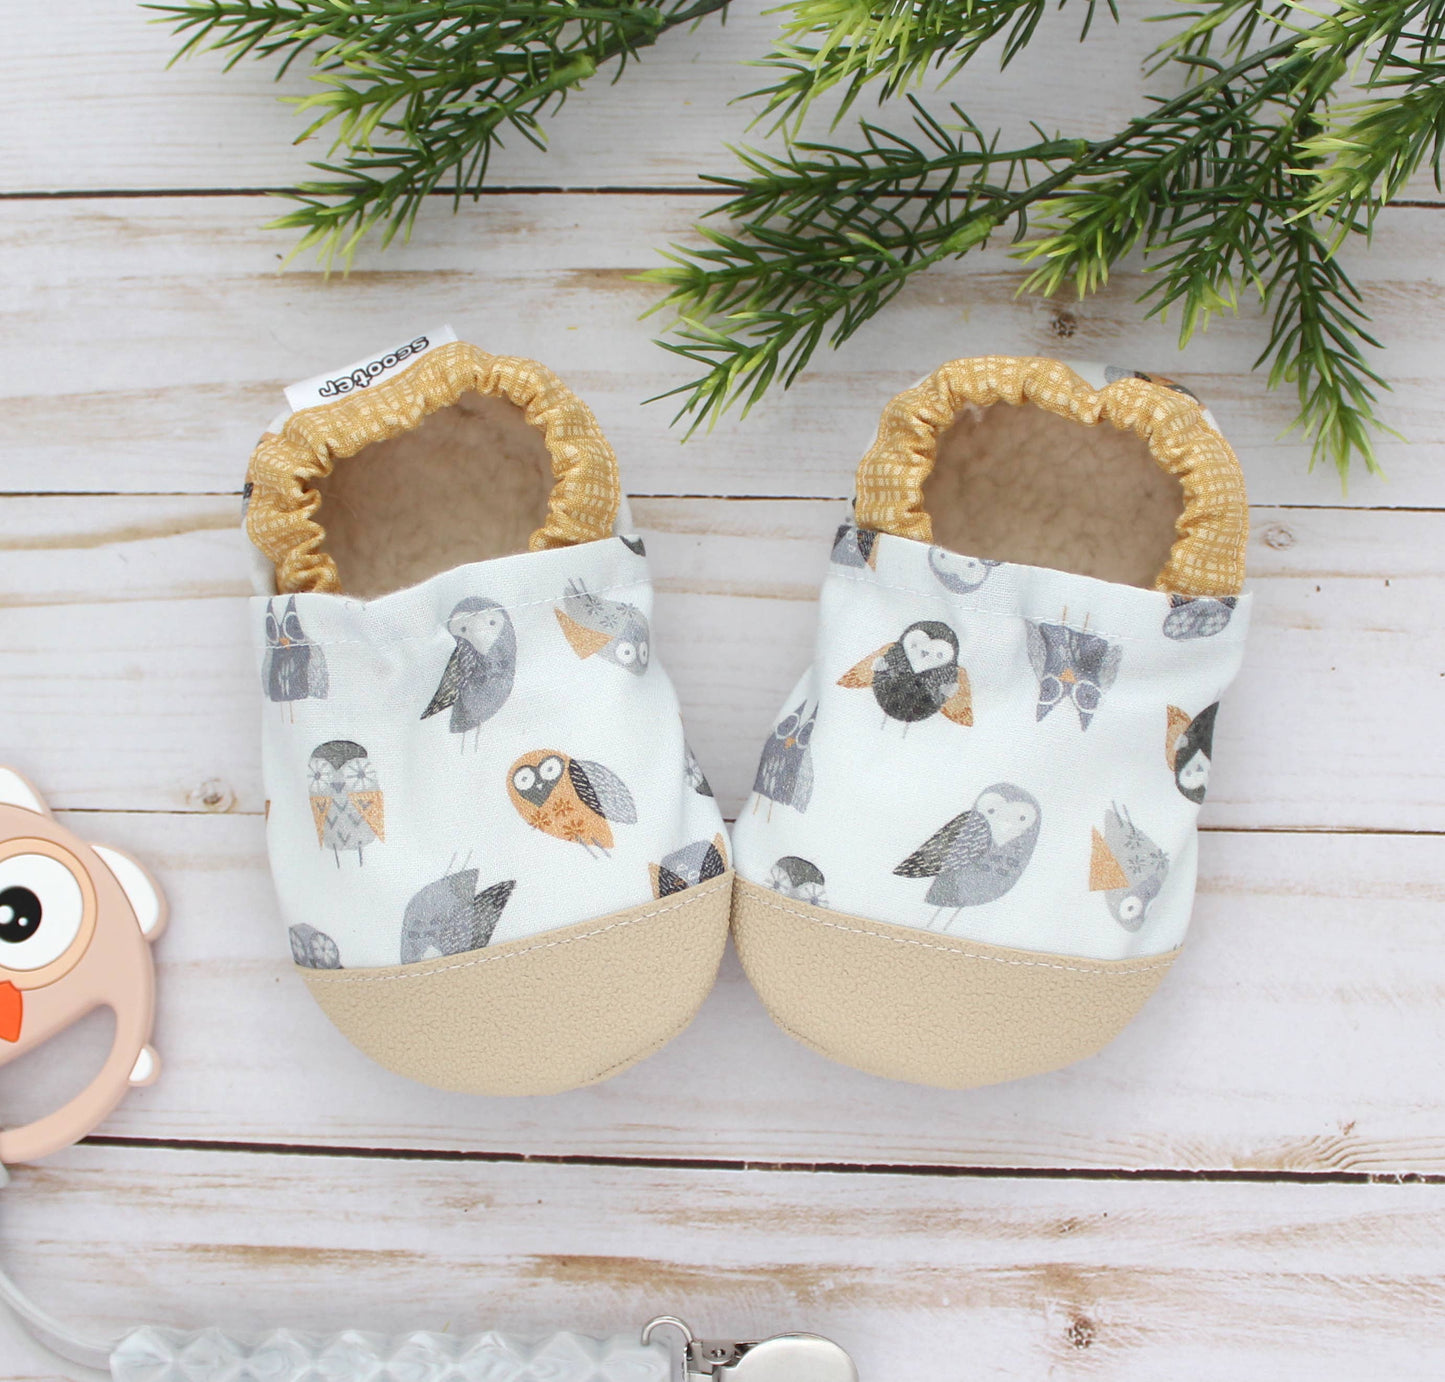 Scooter Booties - Hoot Hoot Owl Baby Shoes: 12 - 18 months